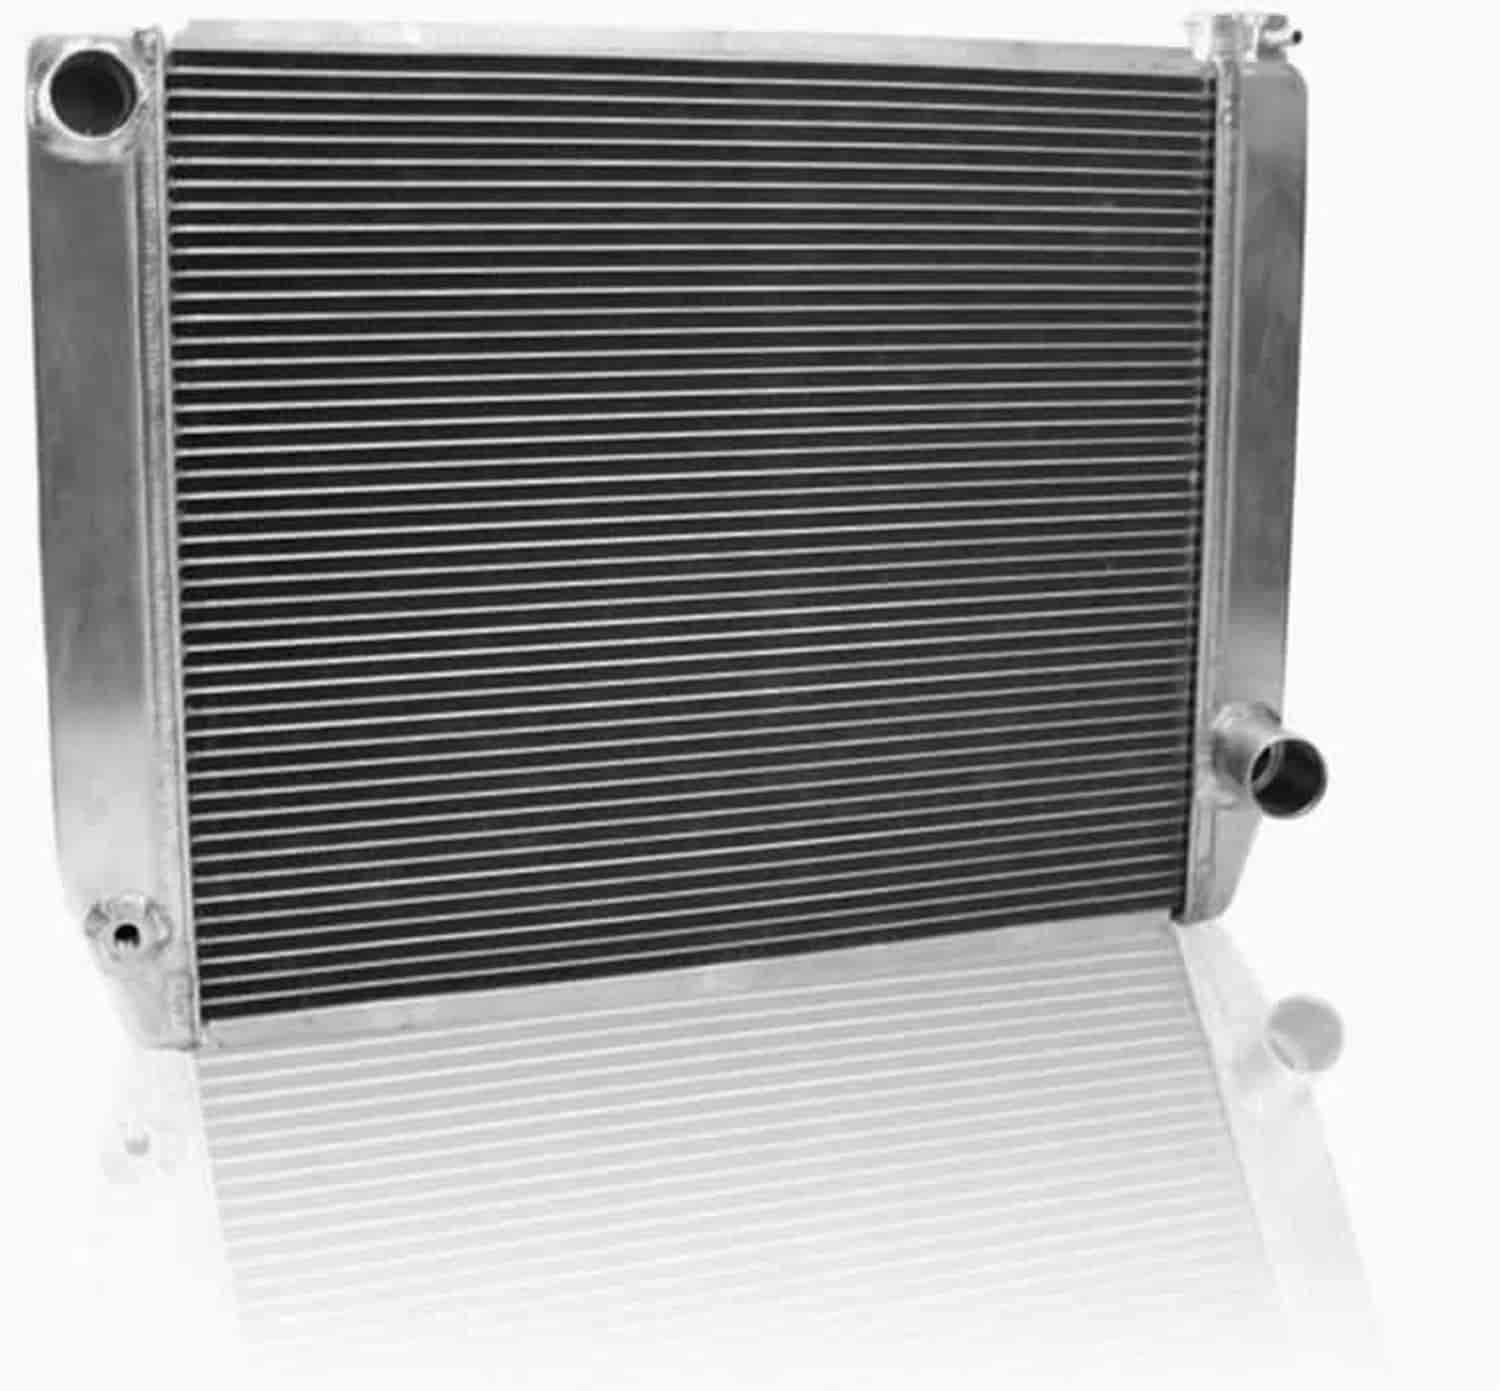 MegaCool Universal Fit Radiator Single Pass Crossflow Design 26" x 19" with Straight Outlet